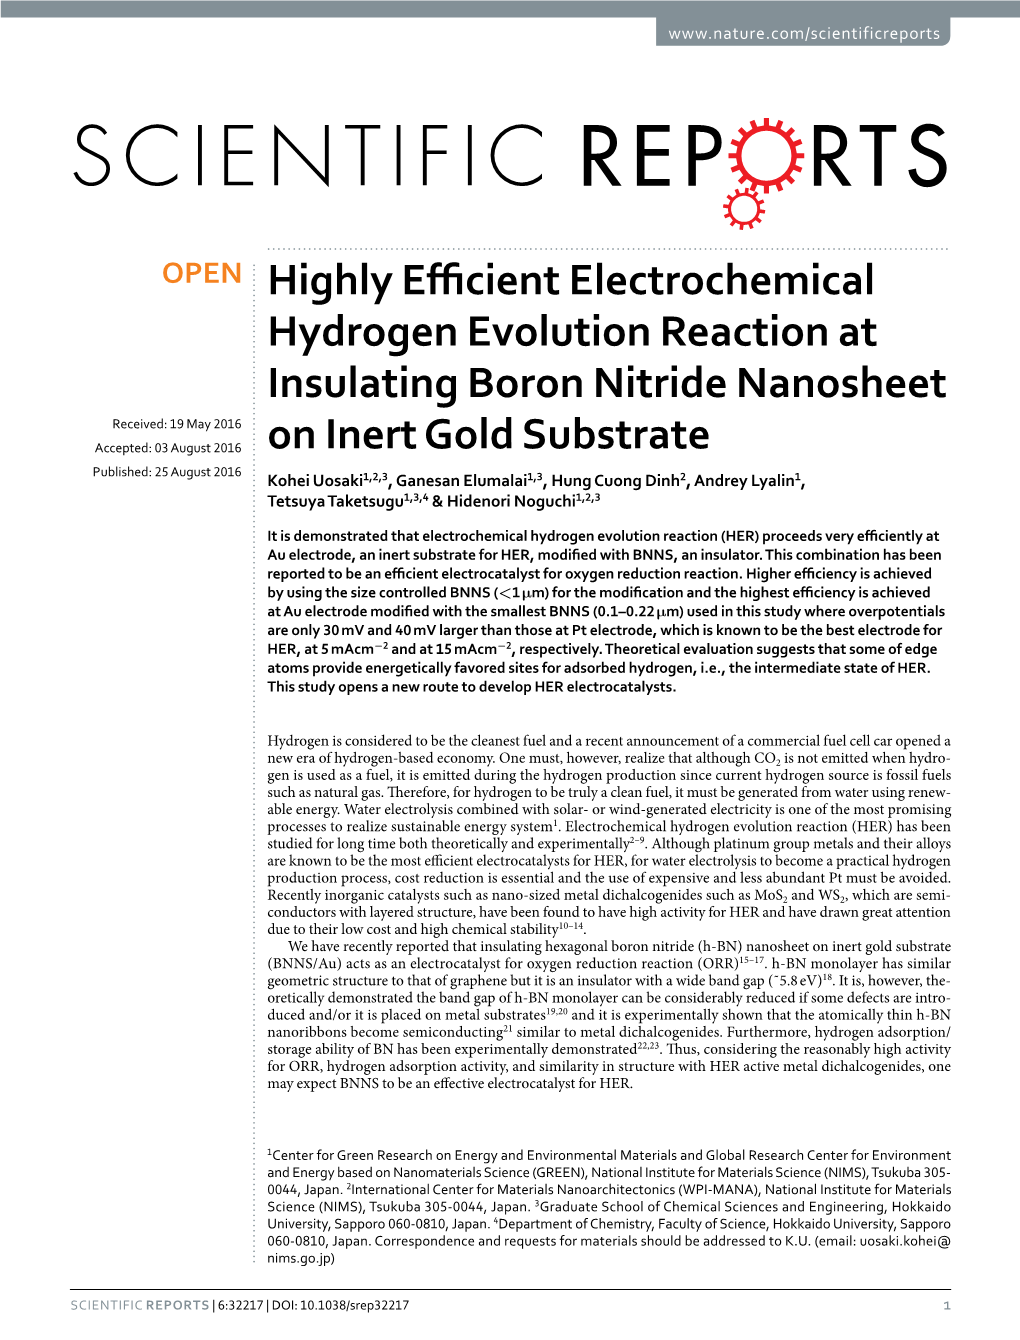 Highly Efficient Electrochemical Hydrogen Evolution Reaction At